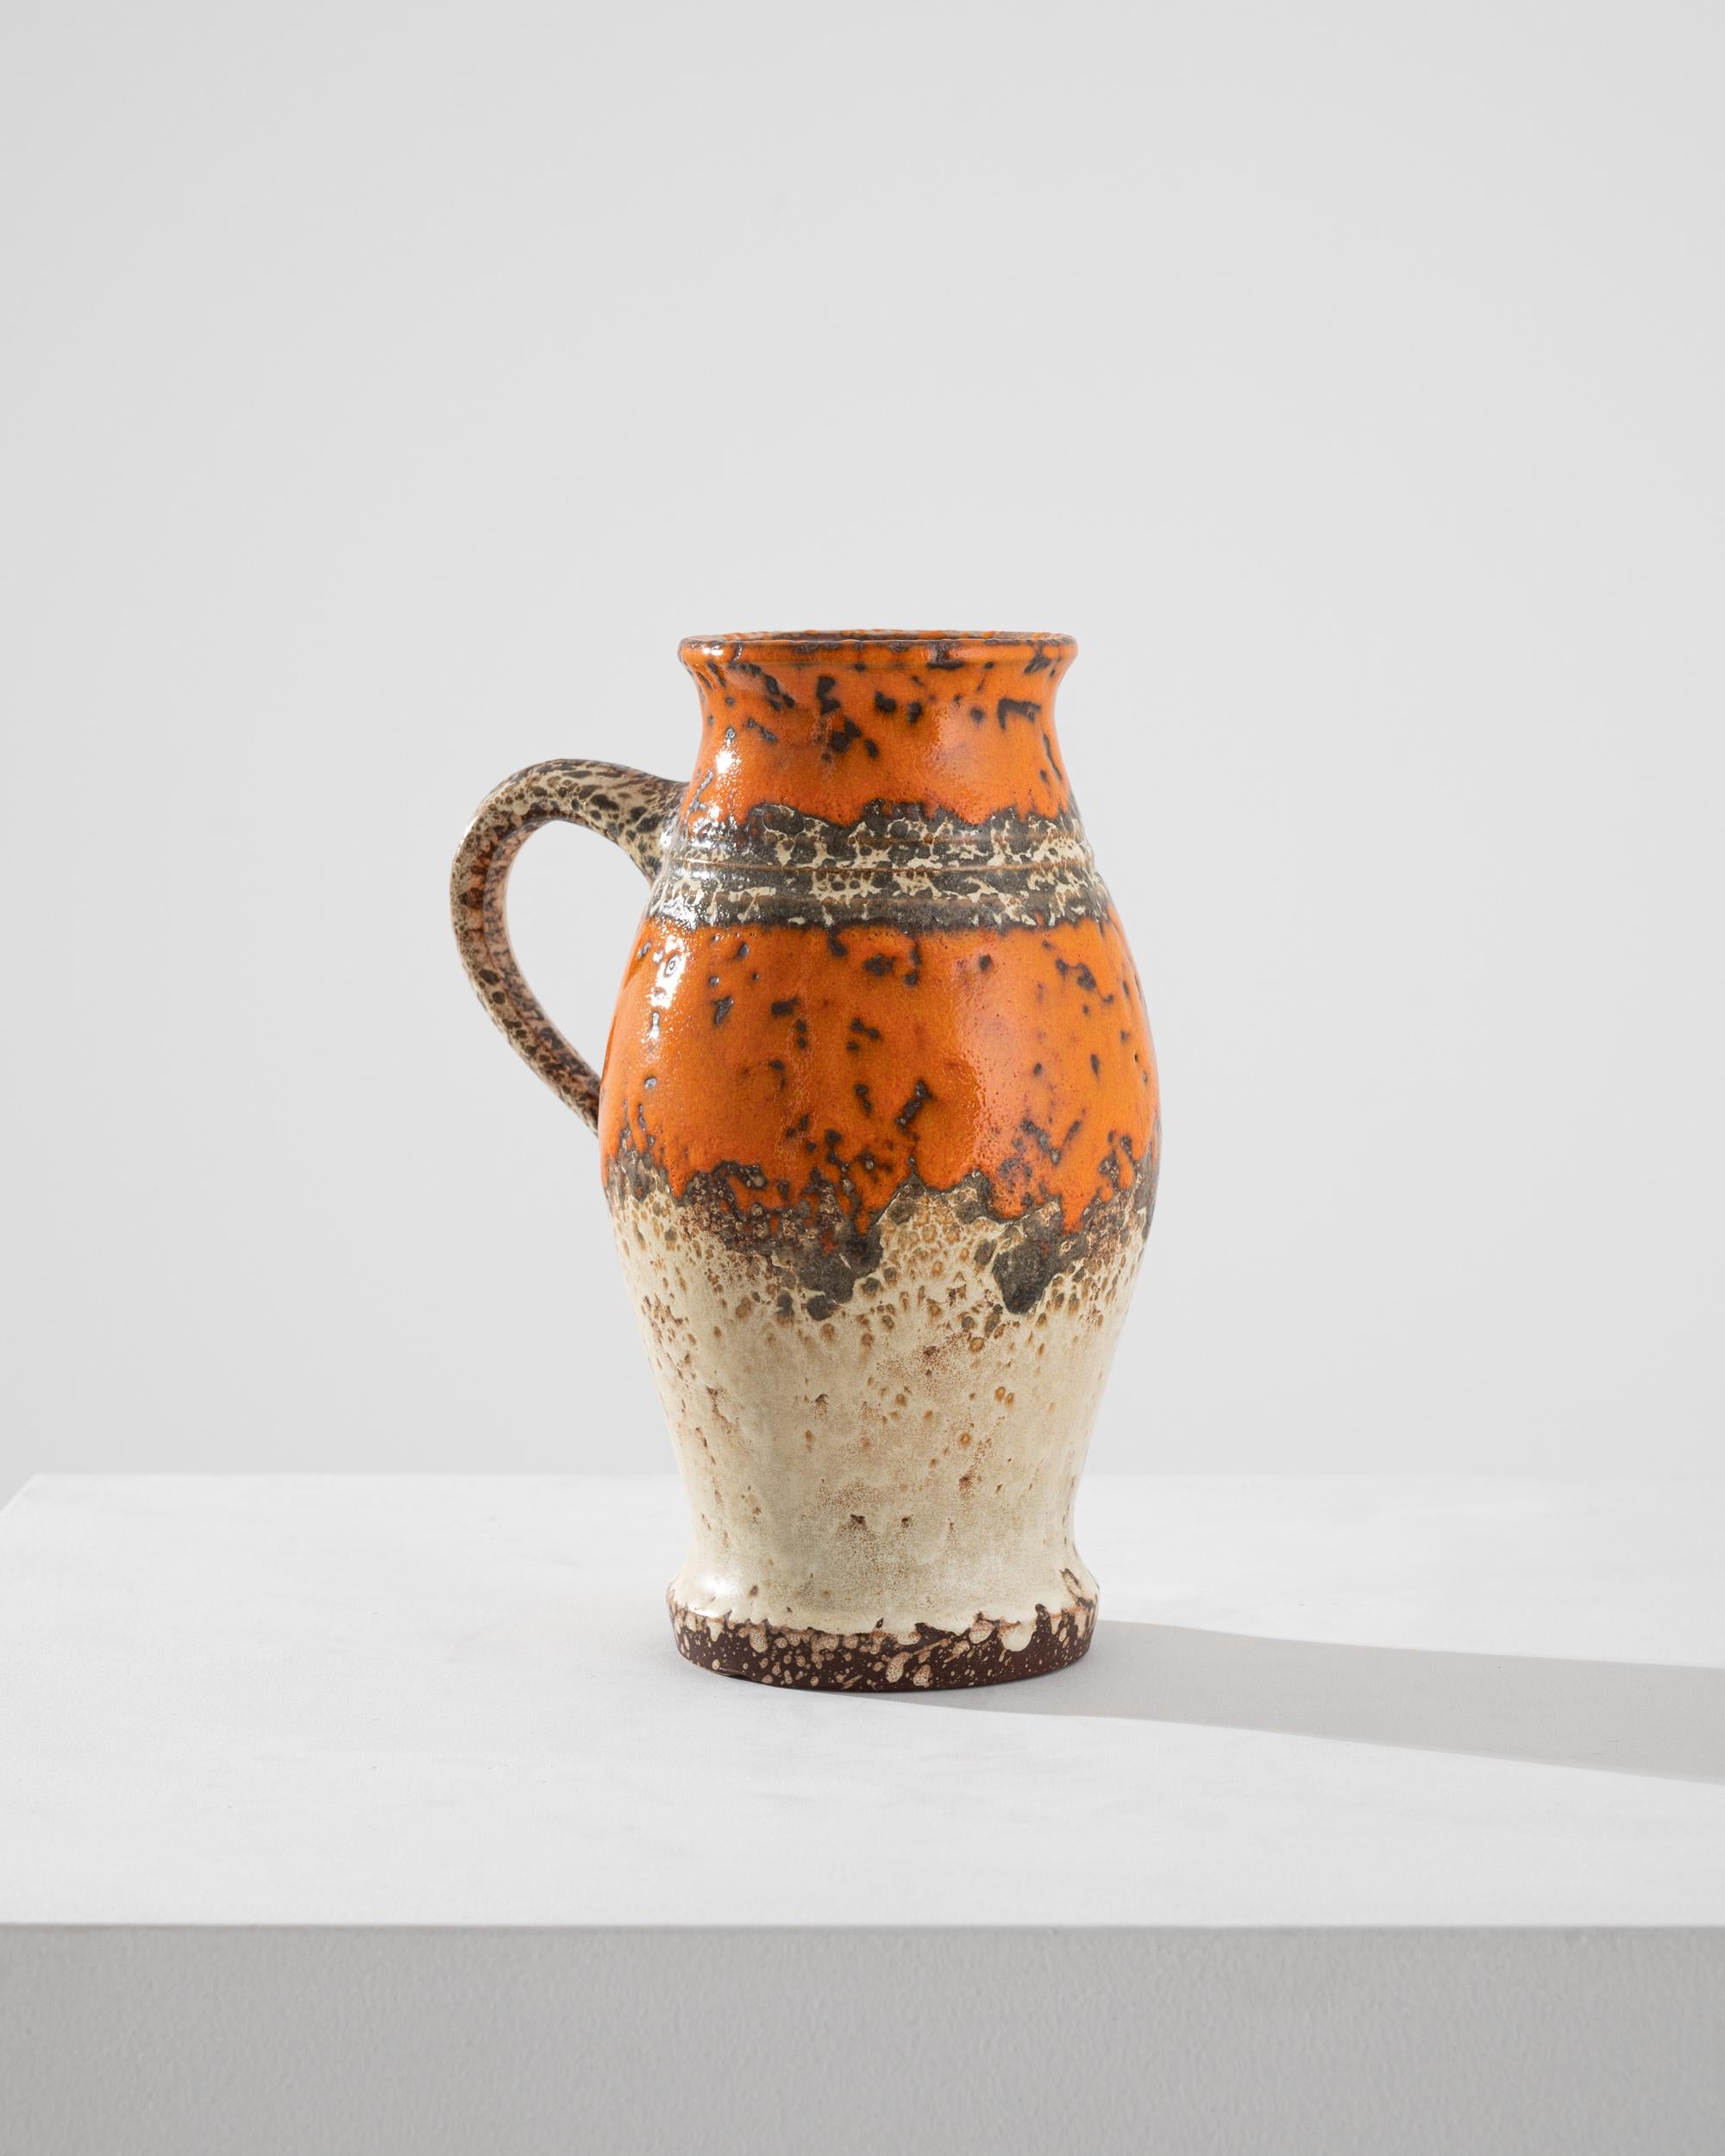 A vintage ceramic vase produced in Germany circa 1960, this pitcher displays all the emblematic qualities of the West Germany style, a unique regional trend. Exhibiting a thick volcanic glaze, the surface shines with a high key orange and titanium